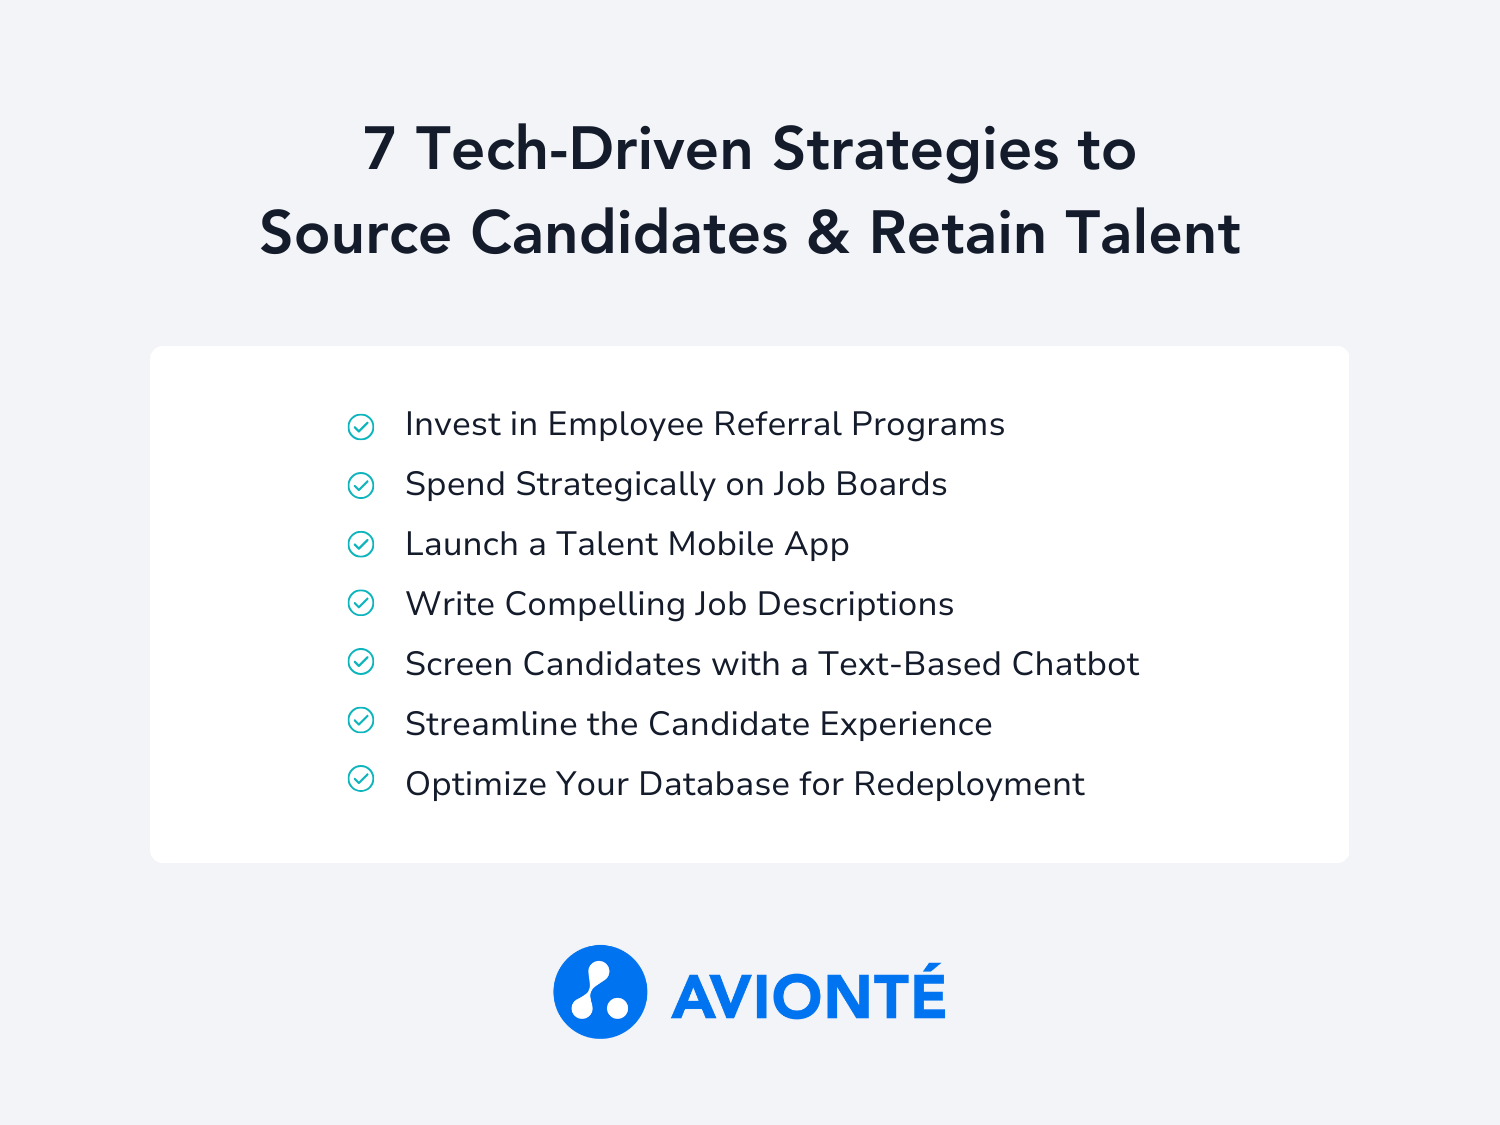 7 Ways to Source Candidates and Retain Talent